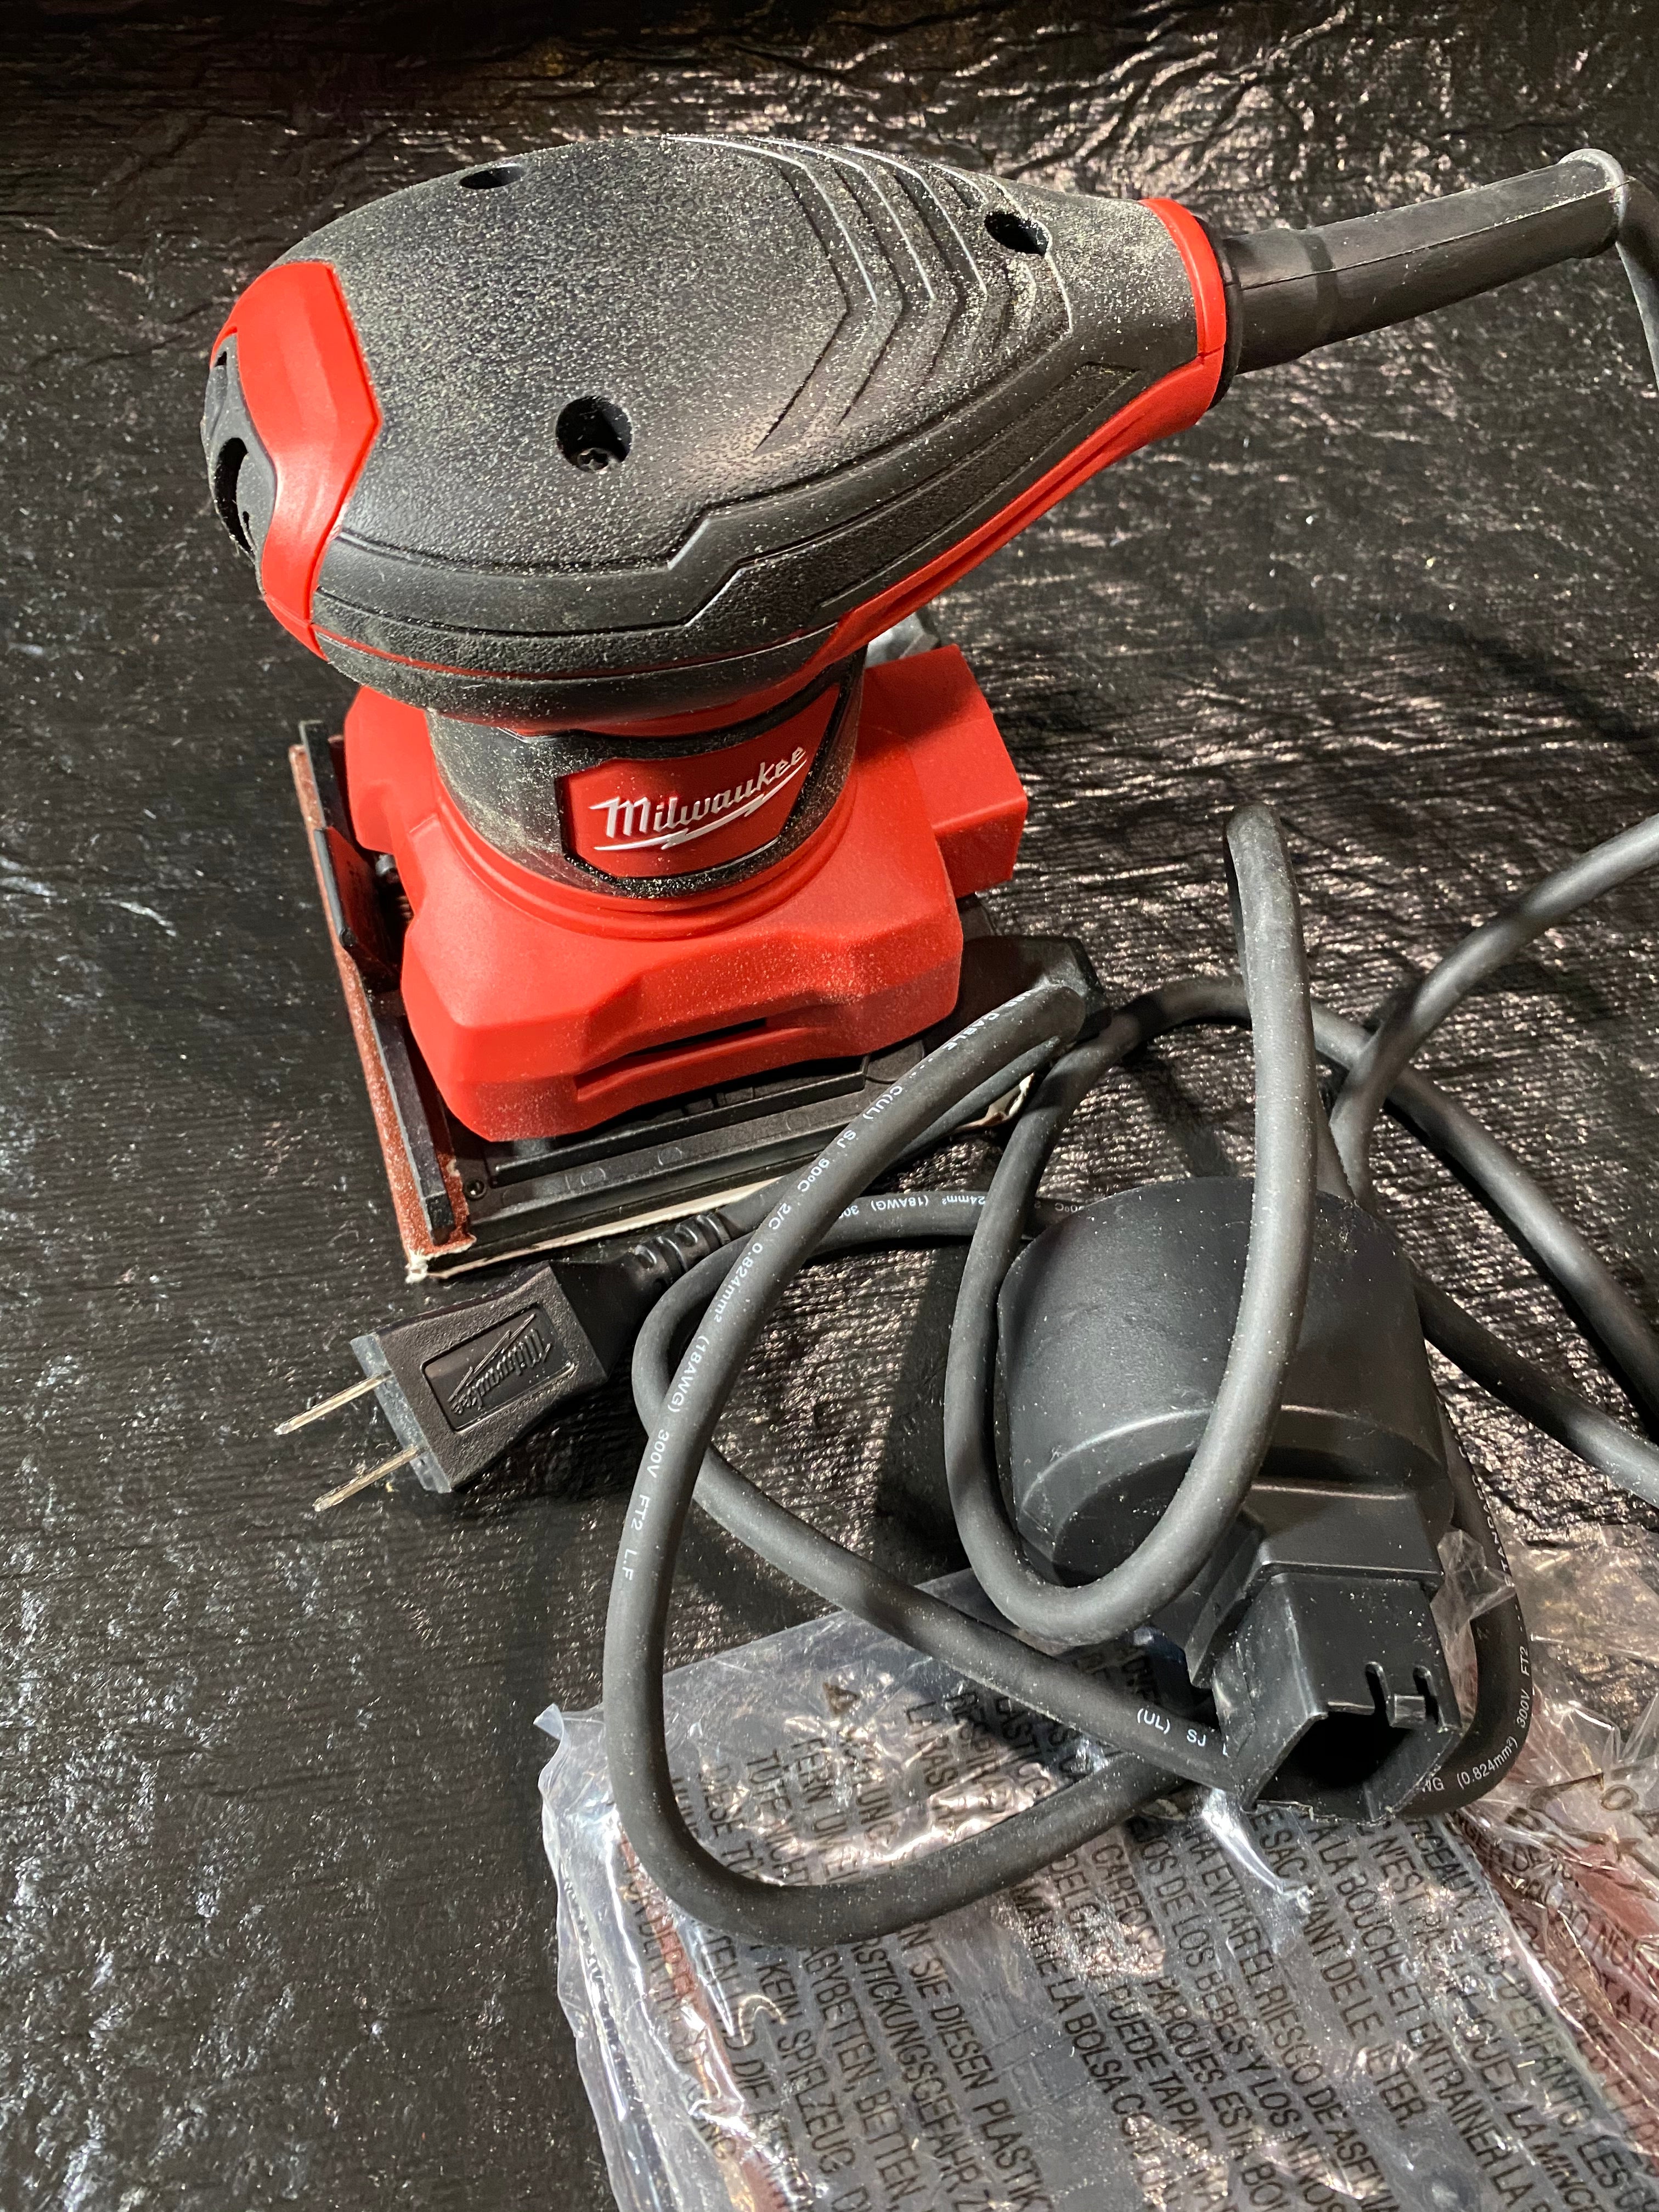 Milwaukee 6033-21 Amp 1/4 Sheet Orbital 14,000 OBM Compact Palm Sander  with Dust Canister (2 Sheets of Sandpaper Included)